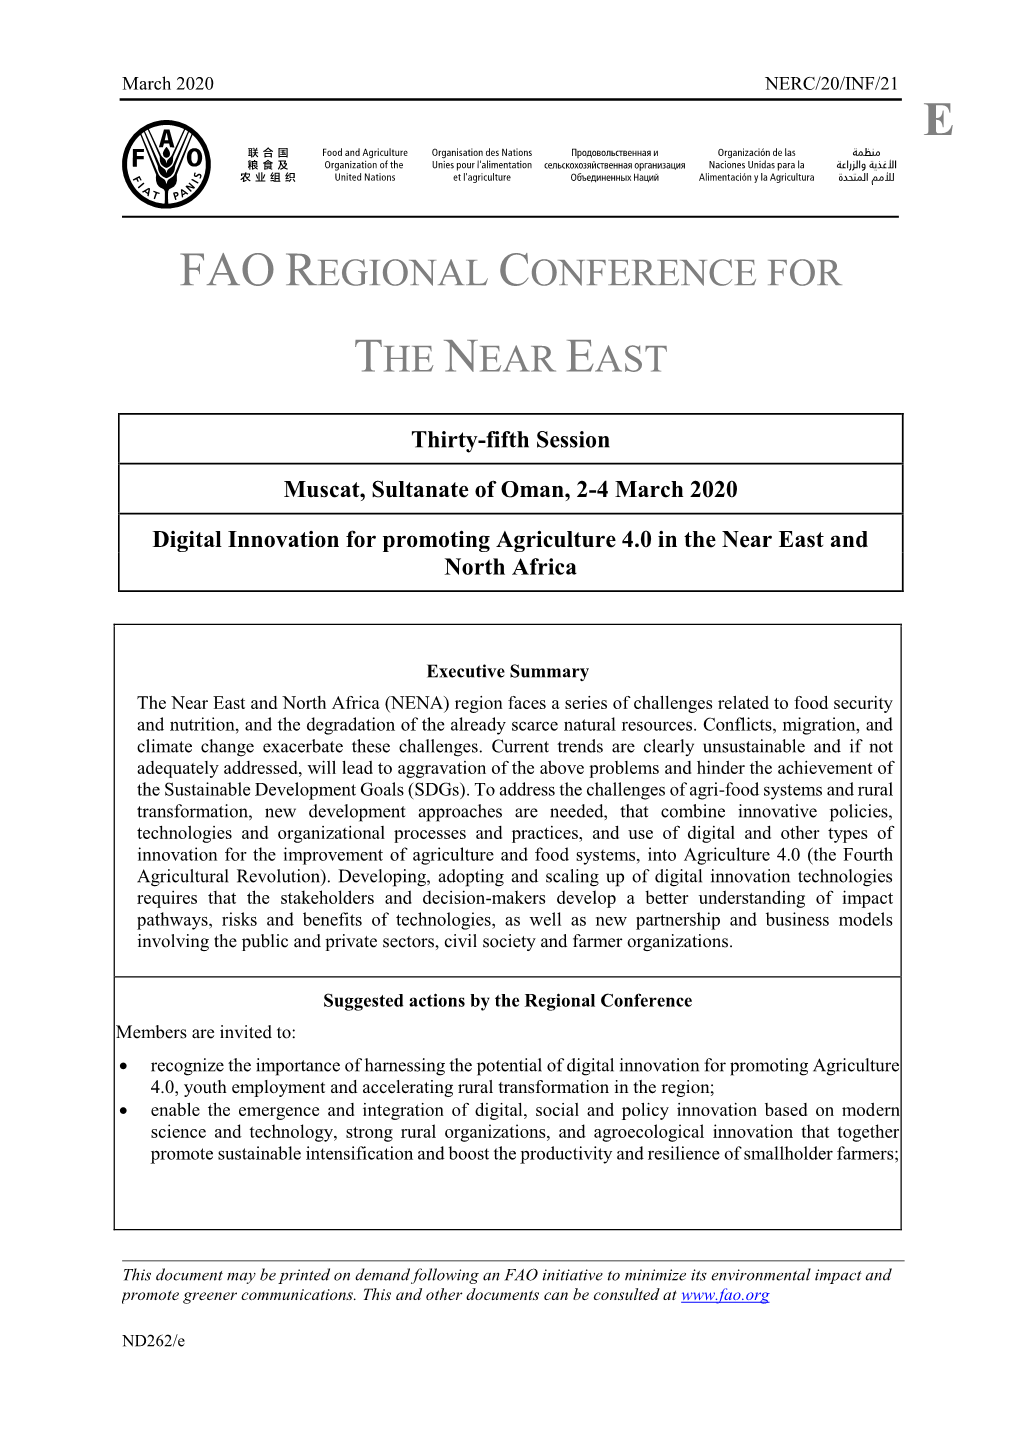 Digital Innovation for Promoting Agriculture 4.0 in the Near East and North Africa